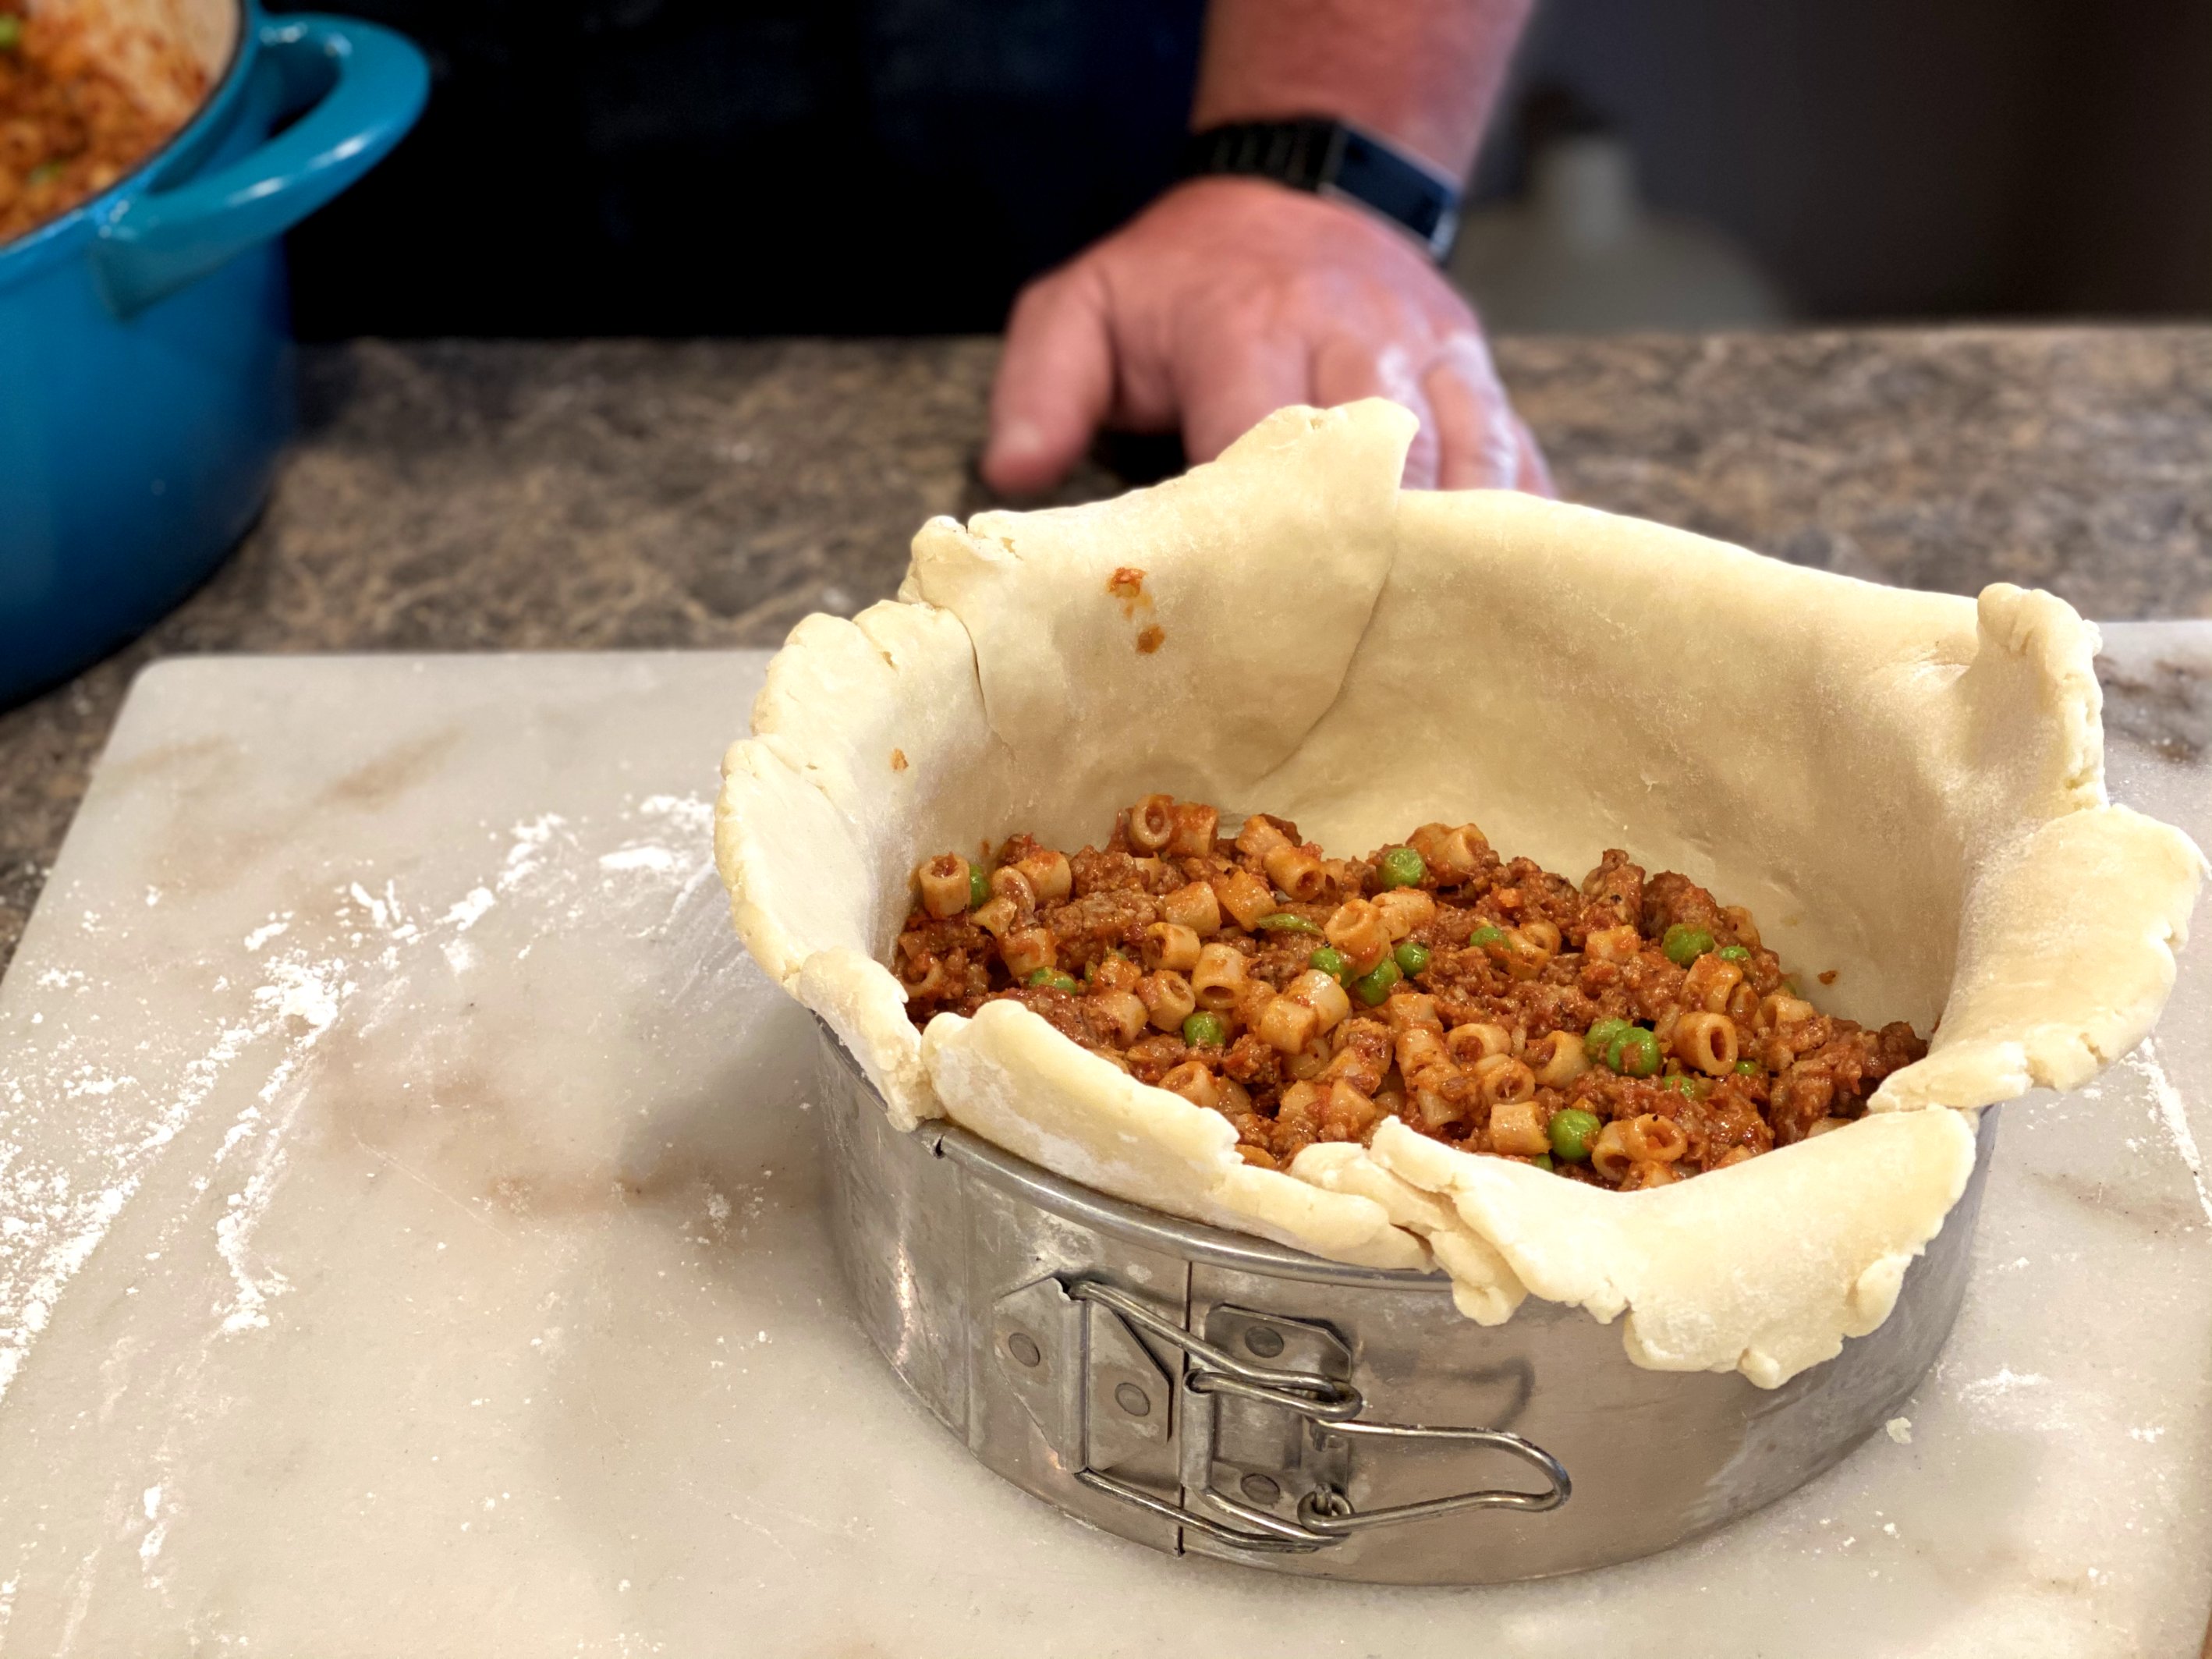 Filling the pie pastry with cooked pasta, peas, and meat sauce.